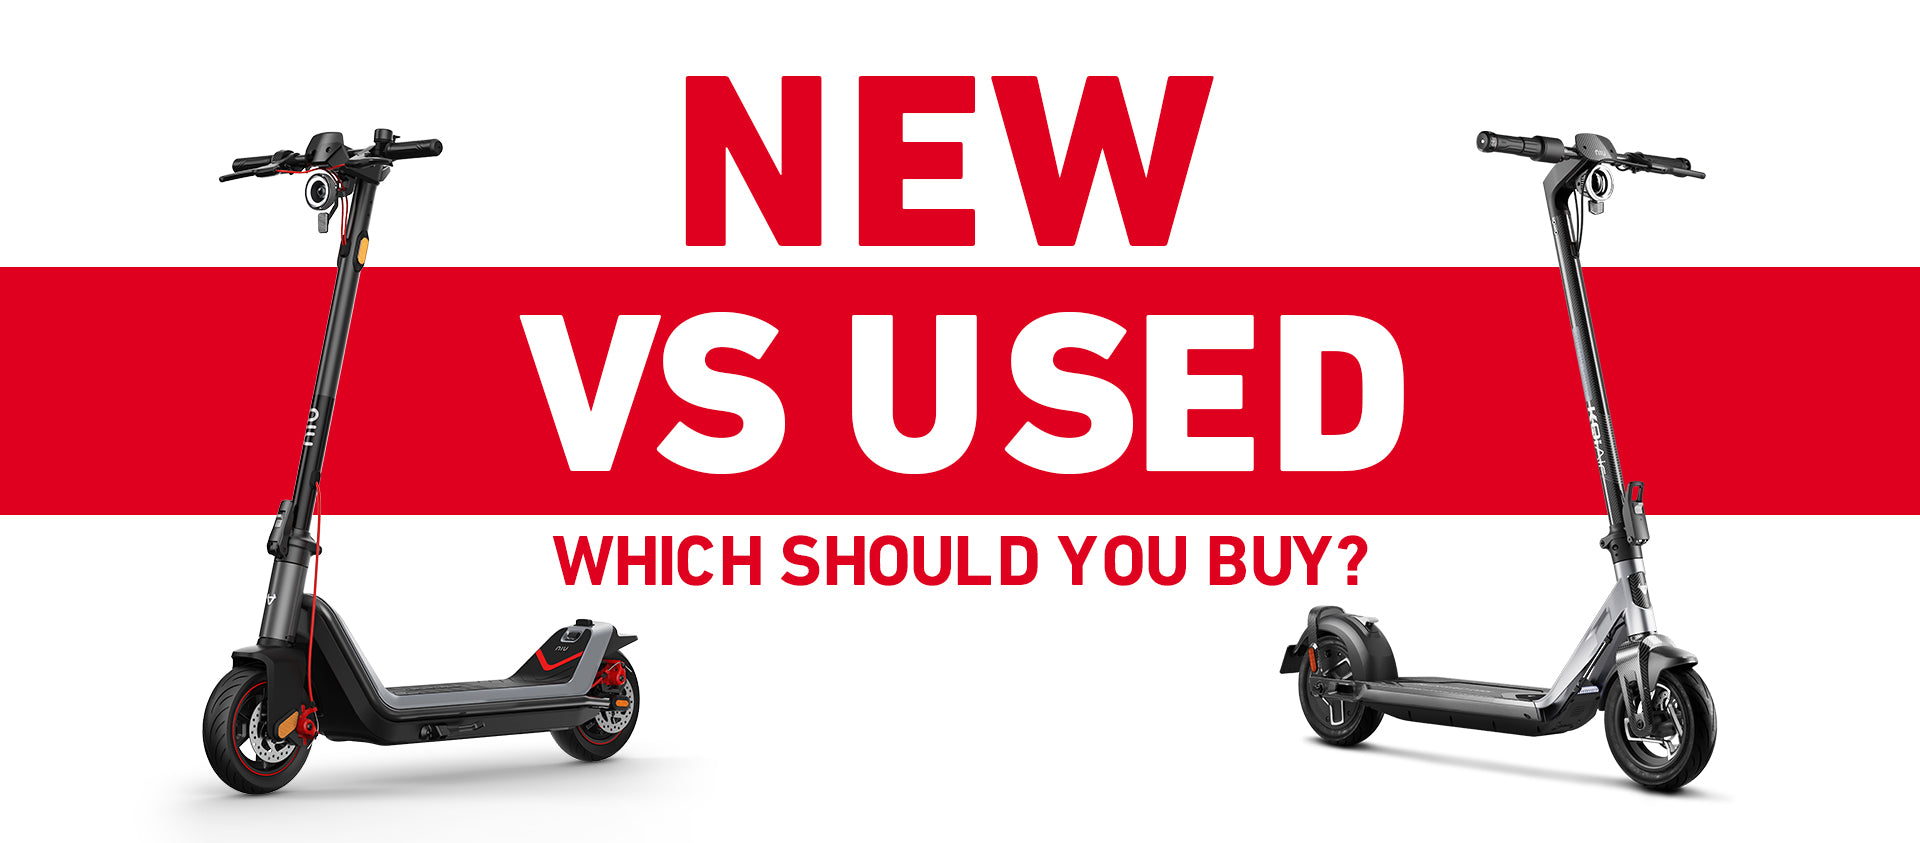 Is it OK to buy used electric scooter?